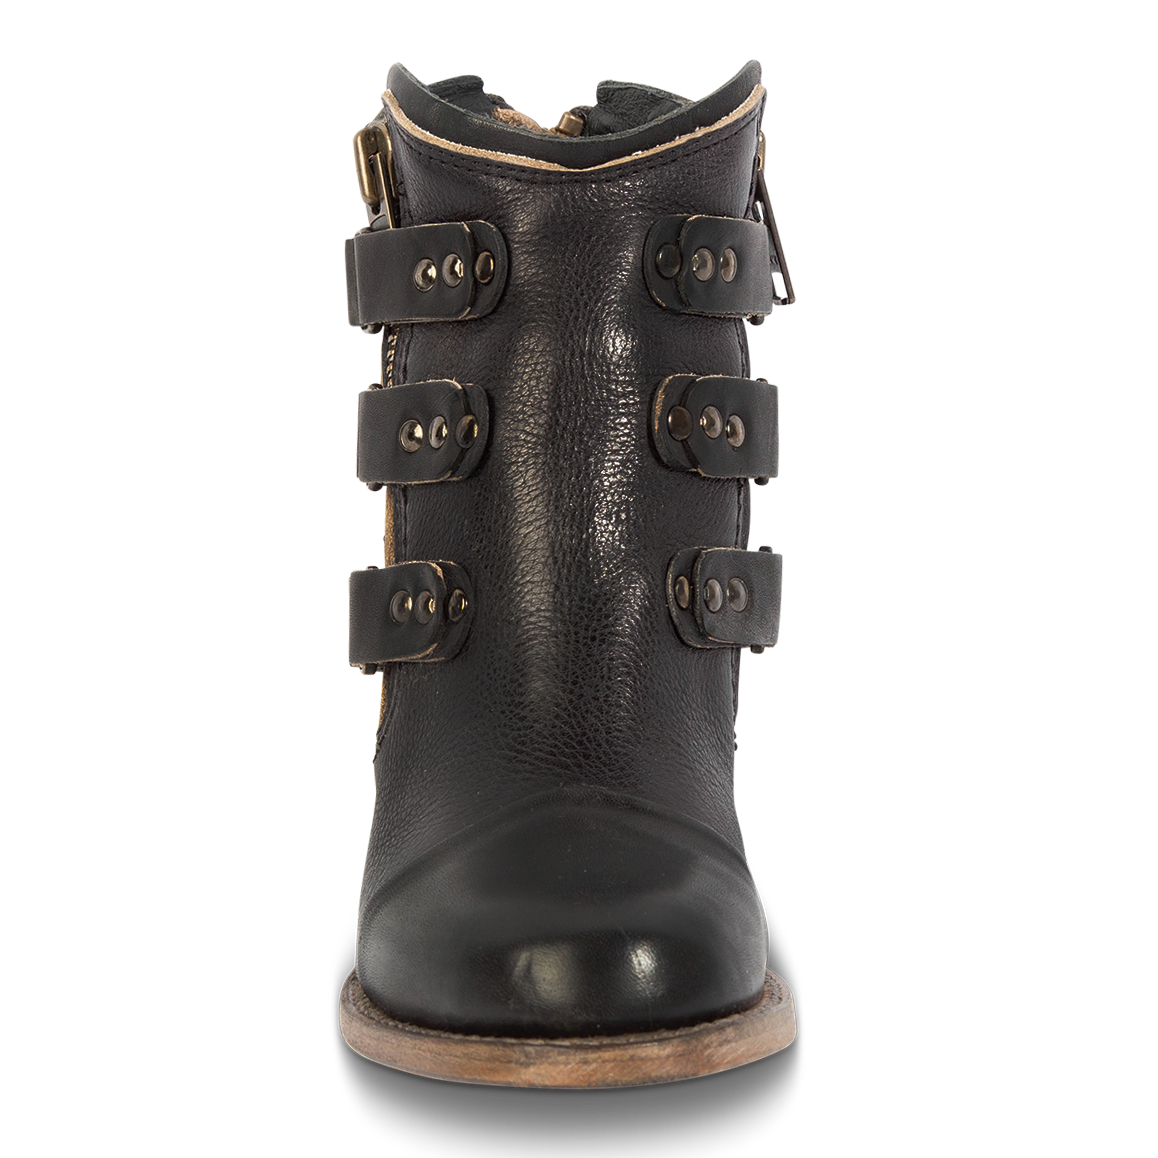 Front view showing symmetrical studded straps and rounded toe on FREEBIRD women's Grecko black leather ankle bootie